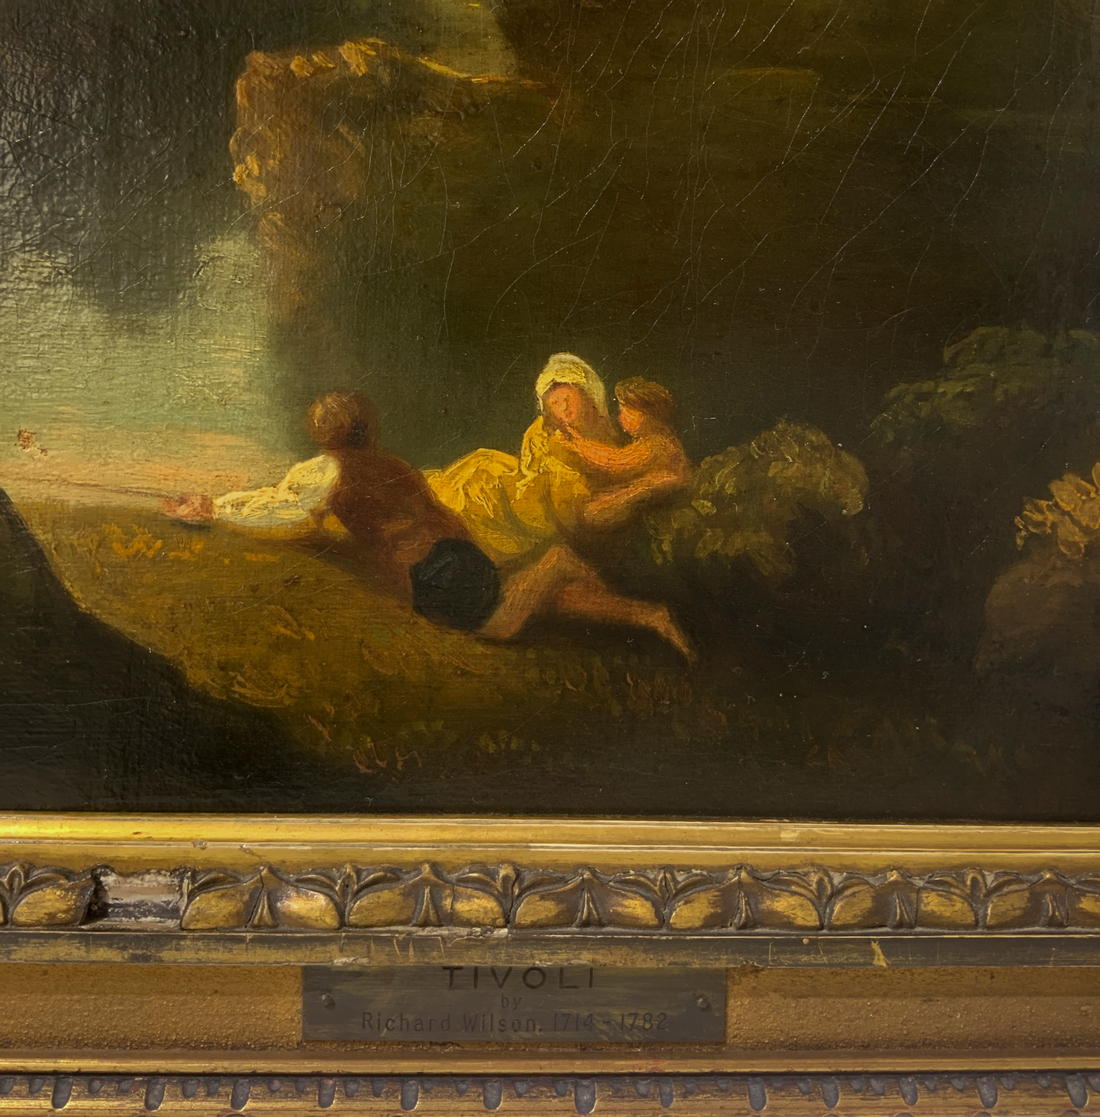 Oil paintinging on canvas depicting Tivoli, allegedly by Richard Wilson (1714-1782). Cm 44x53 in fra - Image 3 of 6